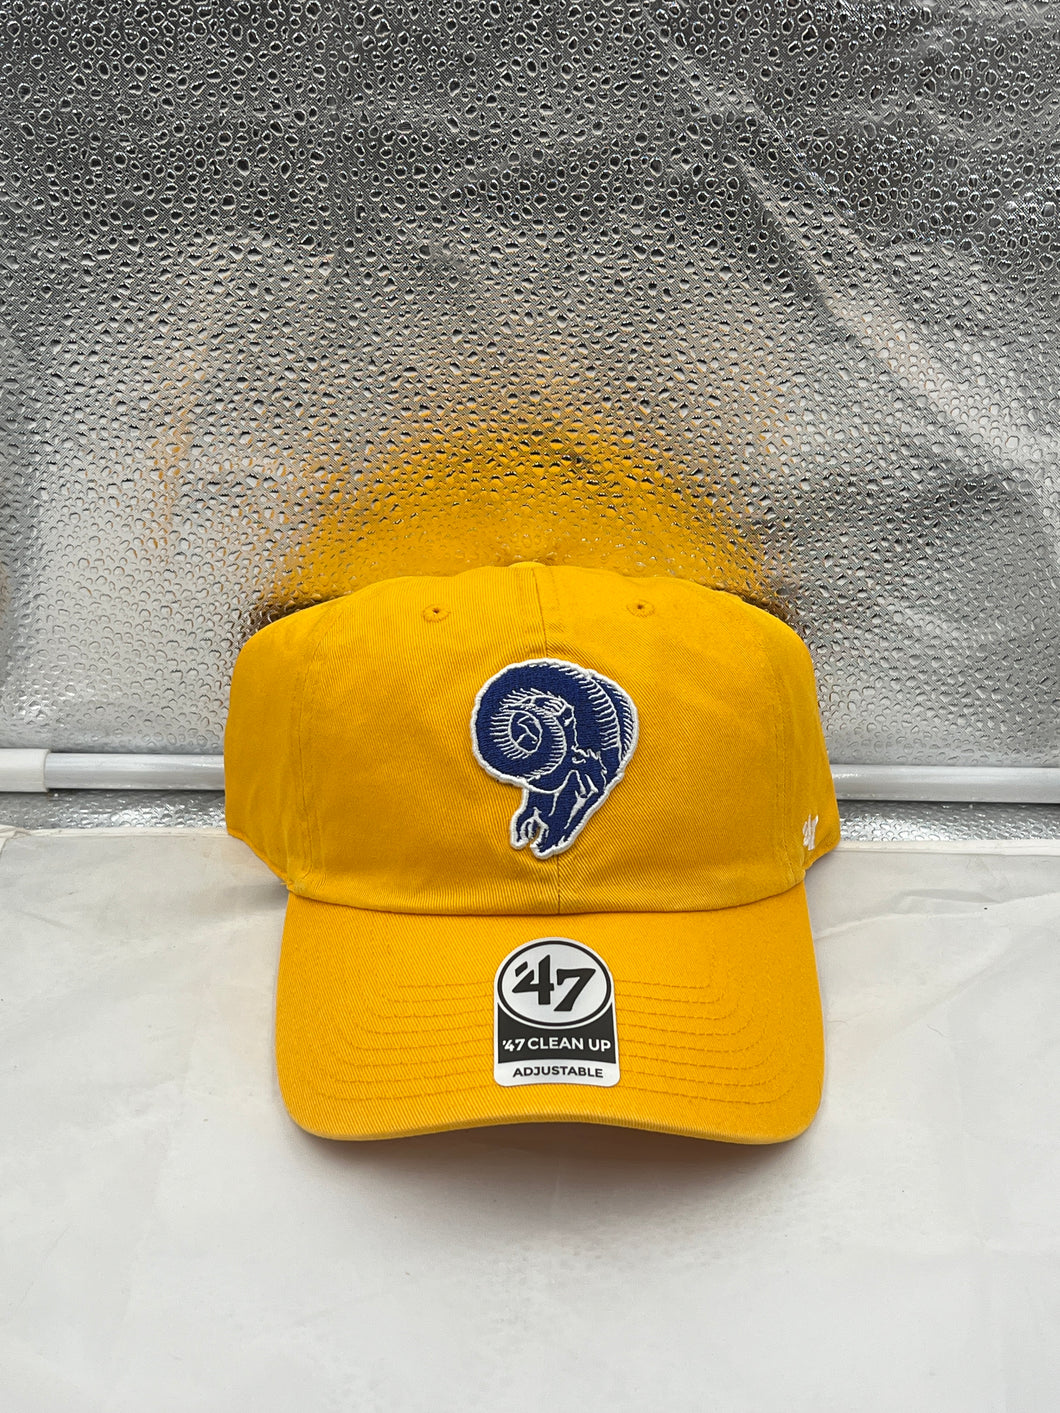 Los Angeles Rams NFL '47 Brand Throwback Gold Clean Up Adjustable Hat - Casey's Sports Store